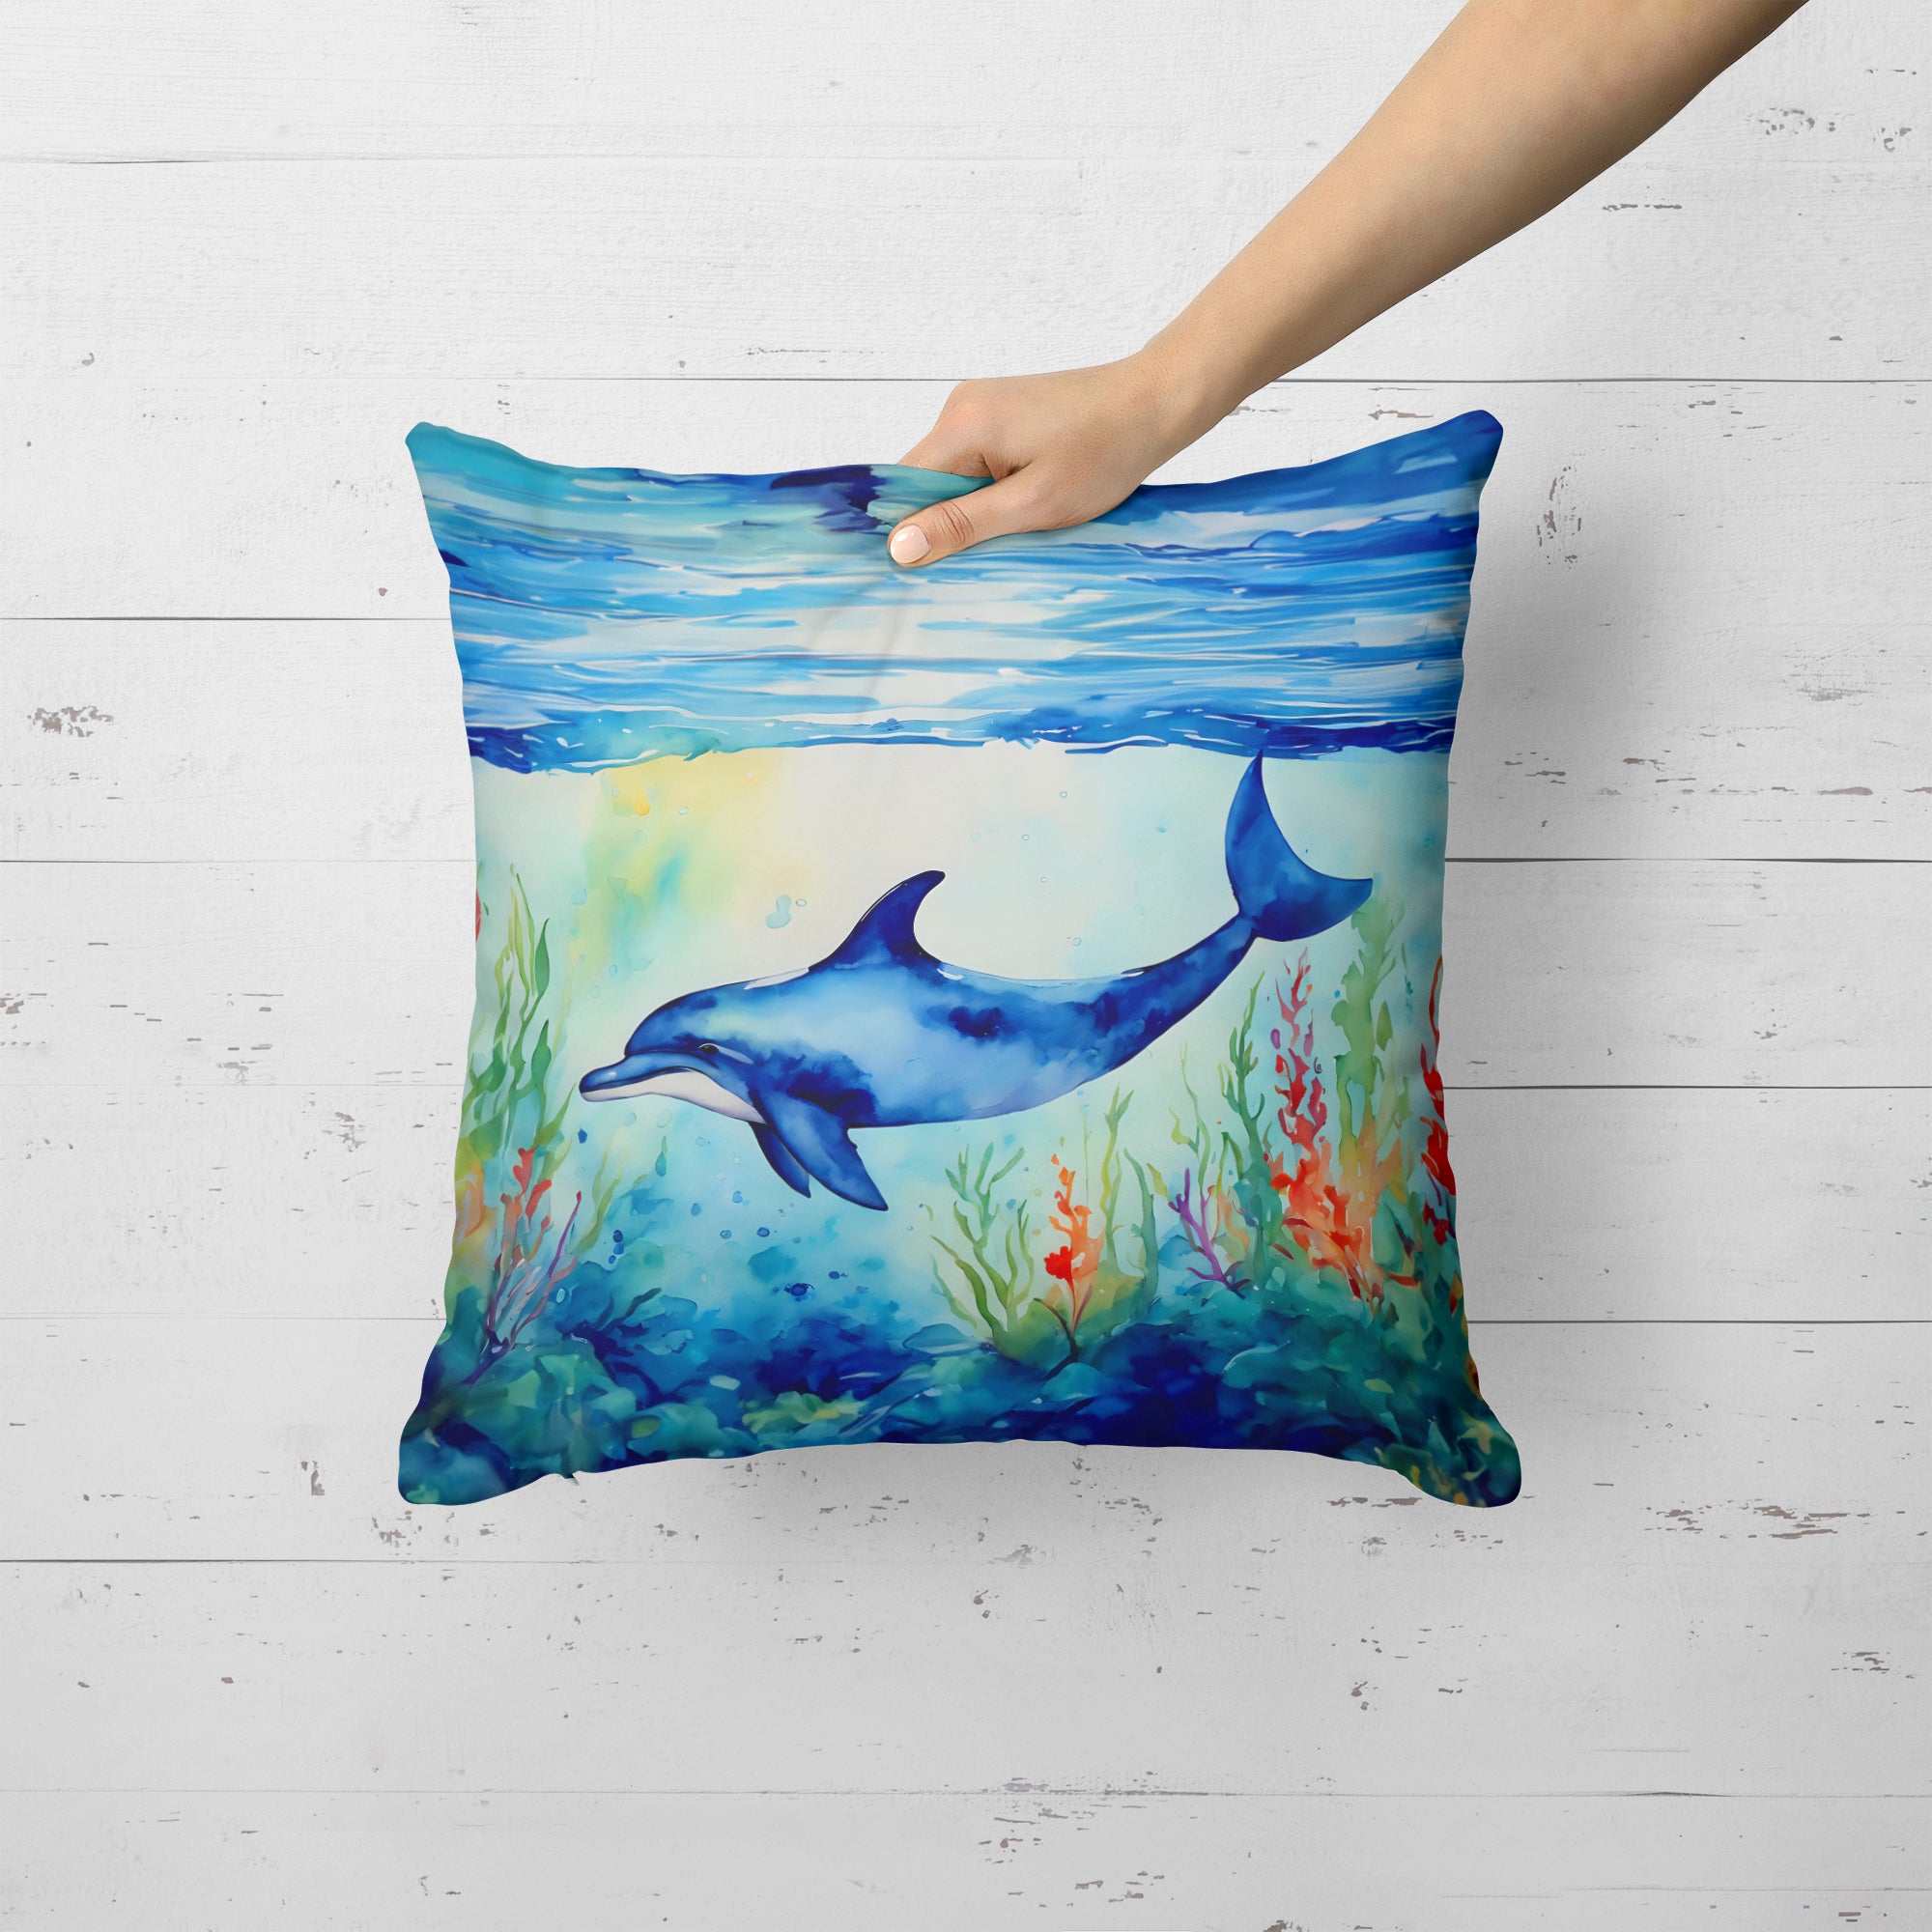 Buy this Dolphin Throw Pillow